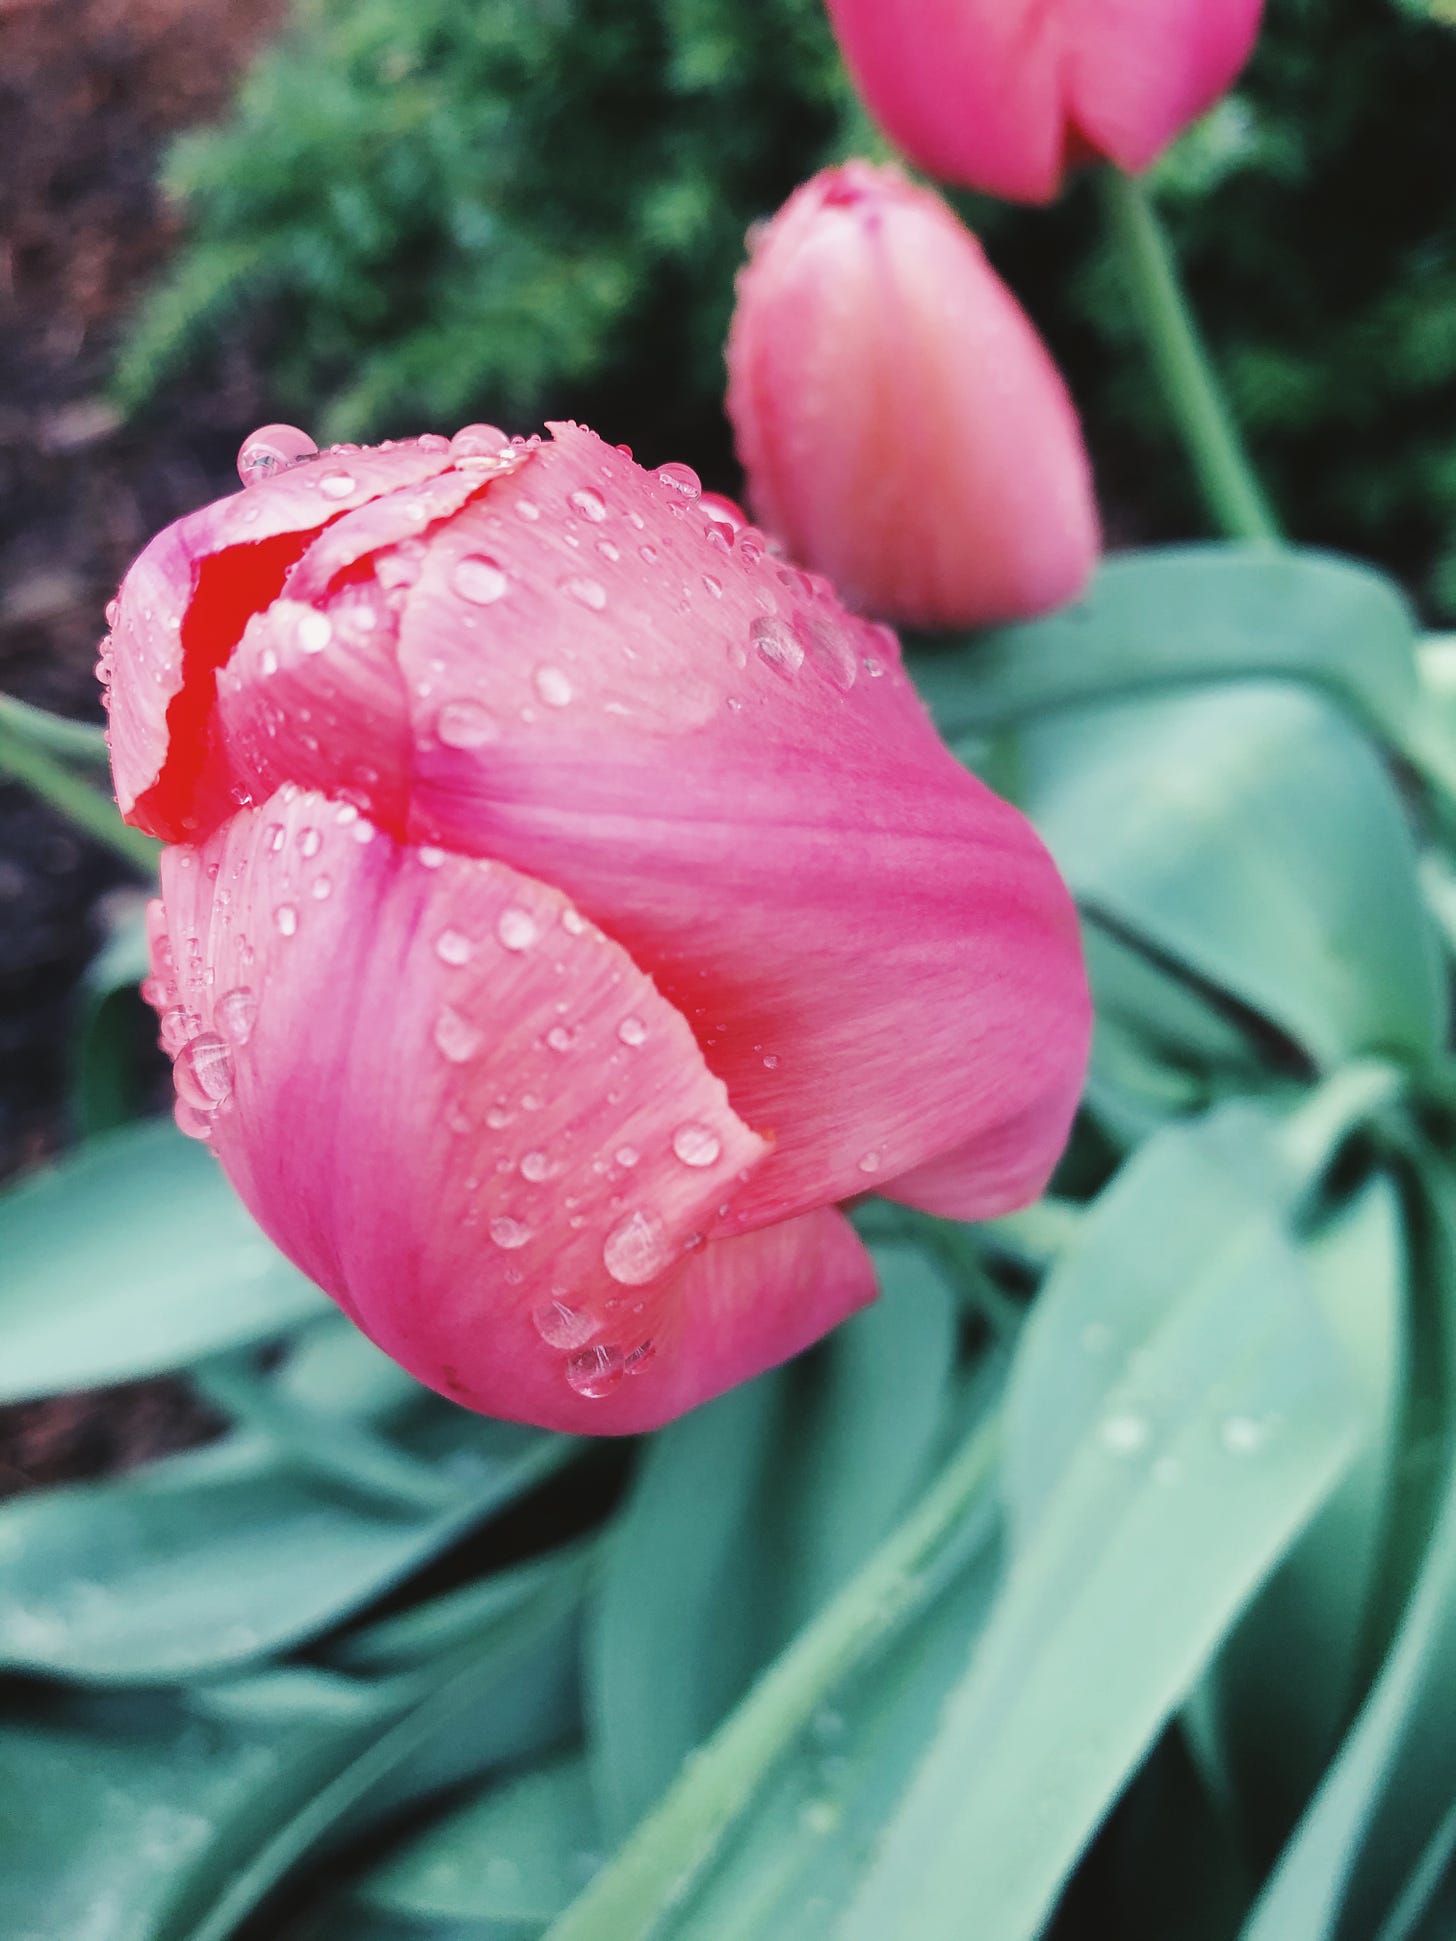 A fresh pink tulip, coated in rain drops, has not yet opened though soon it will.